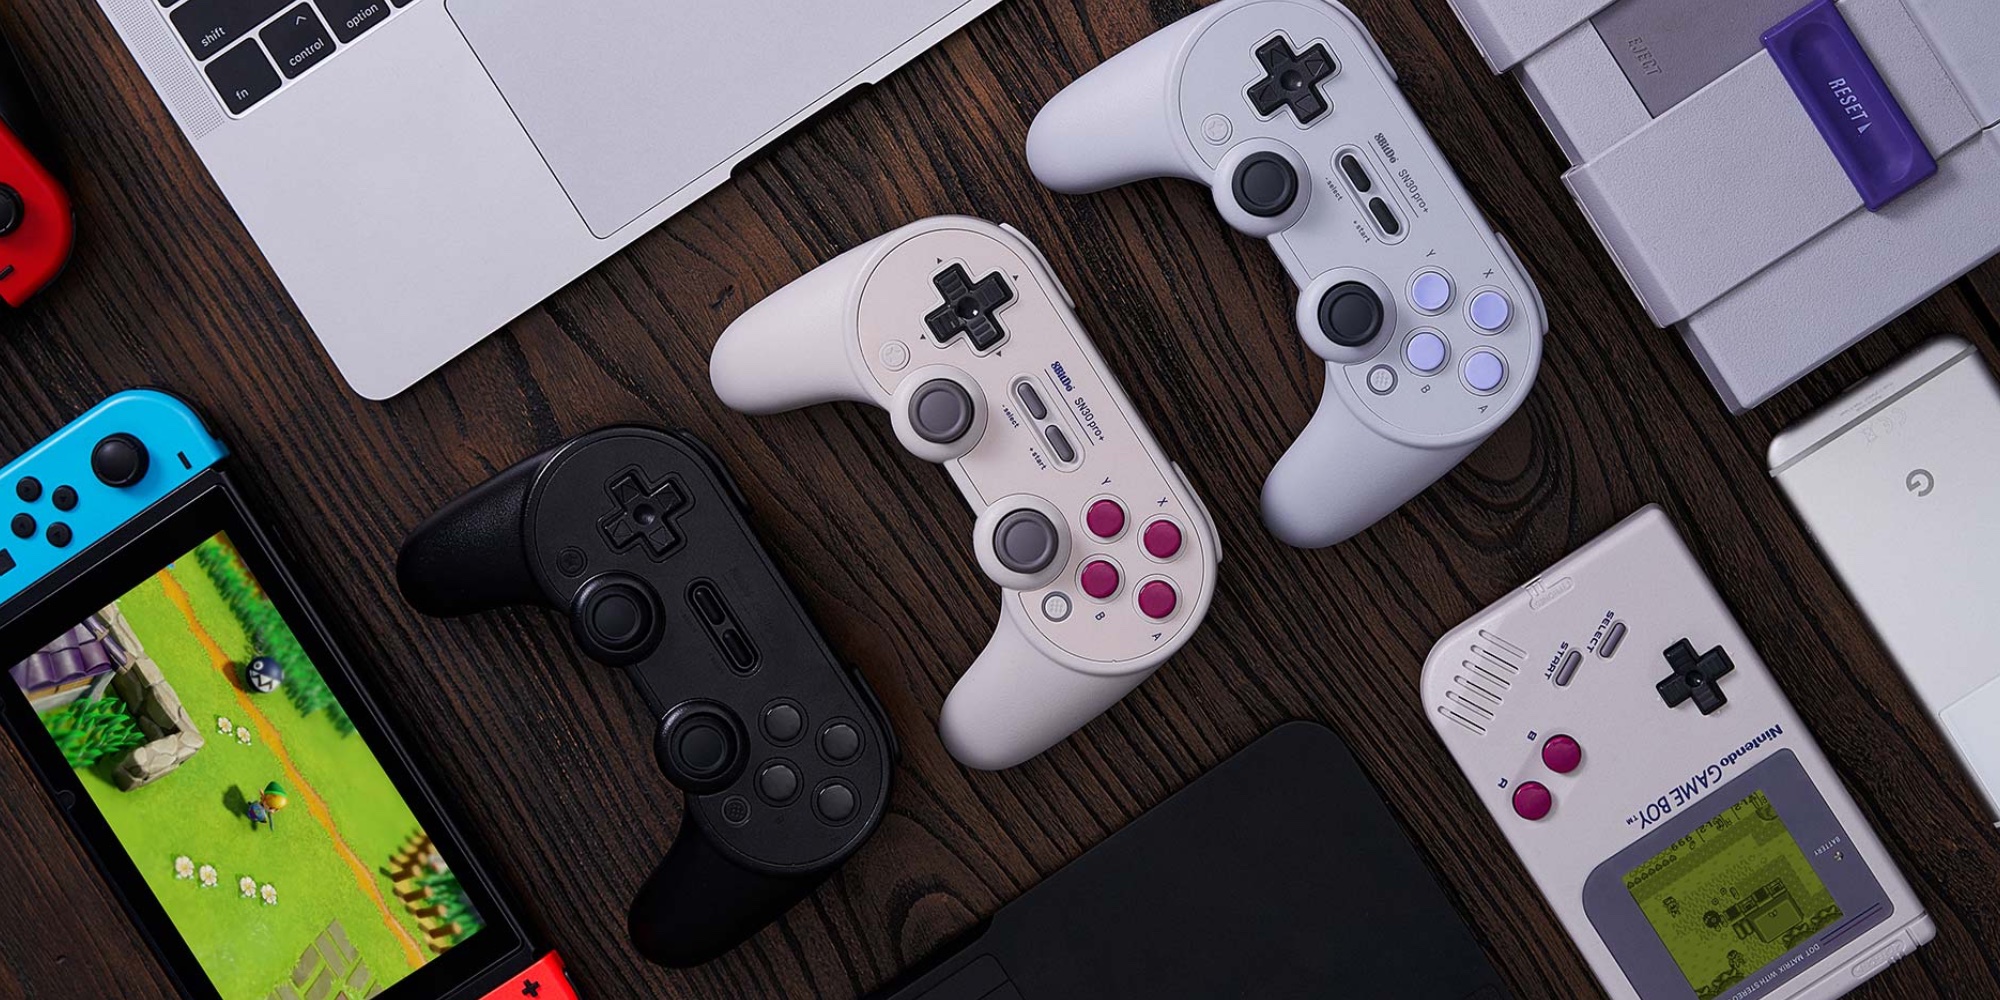 8bitdo Sn30 Pro Gamepad Is Now Available For Pre Order 9to5toys